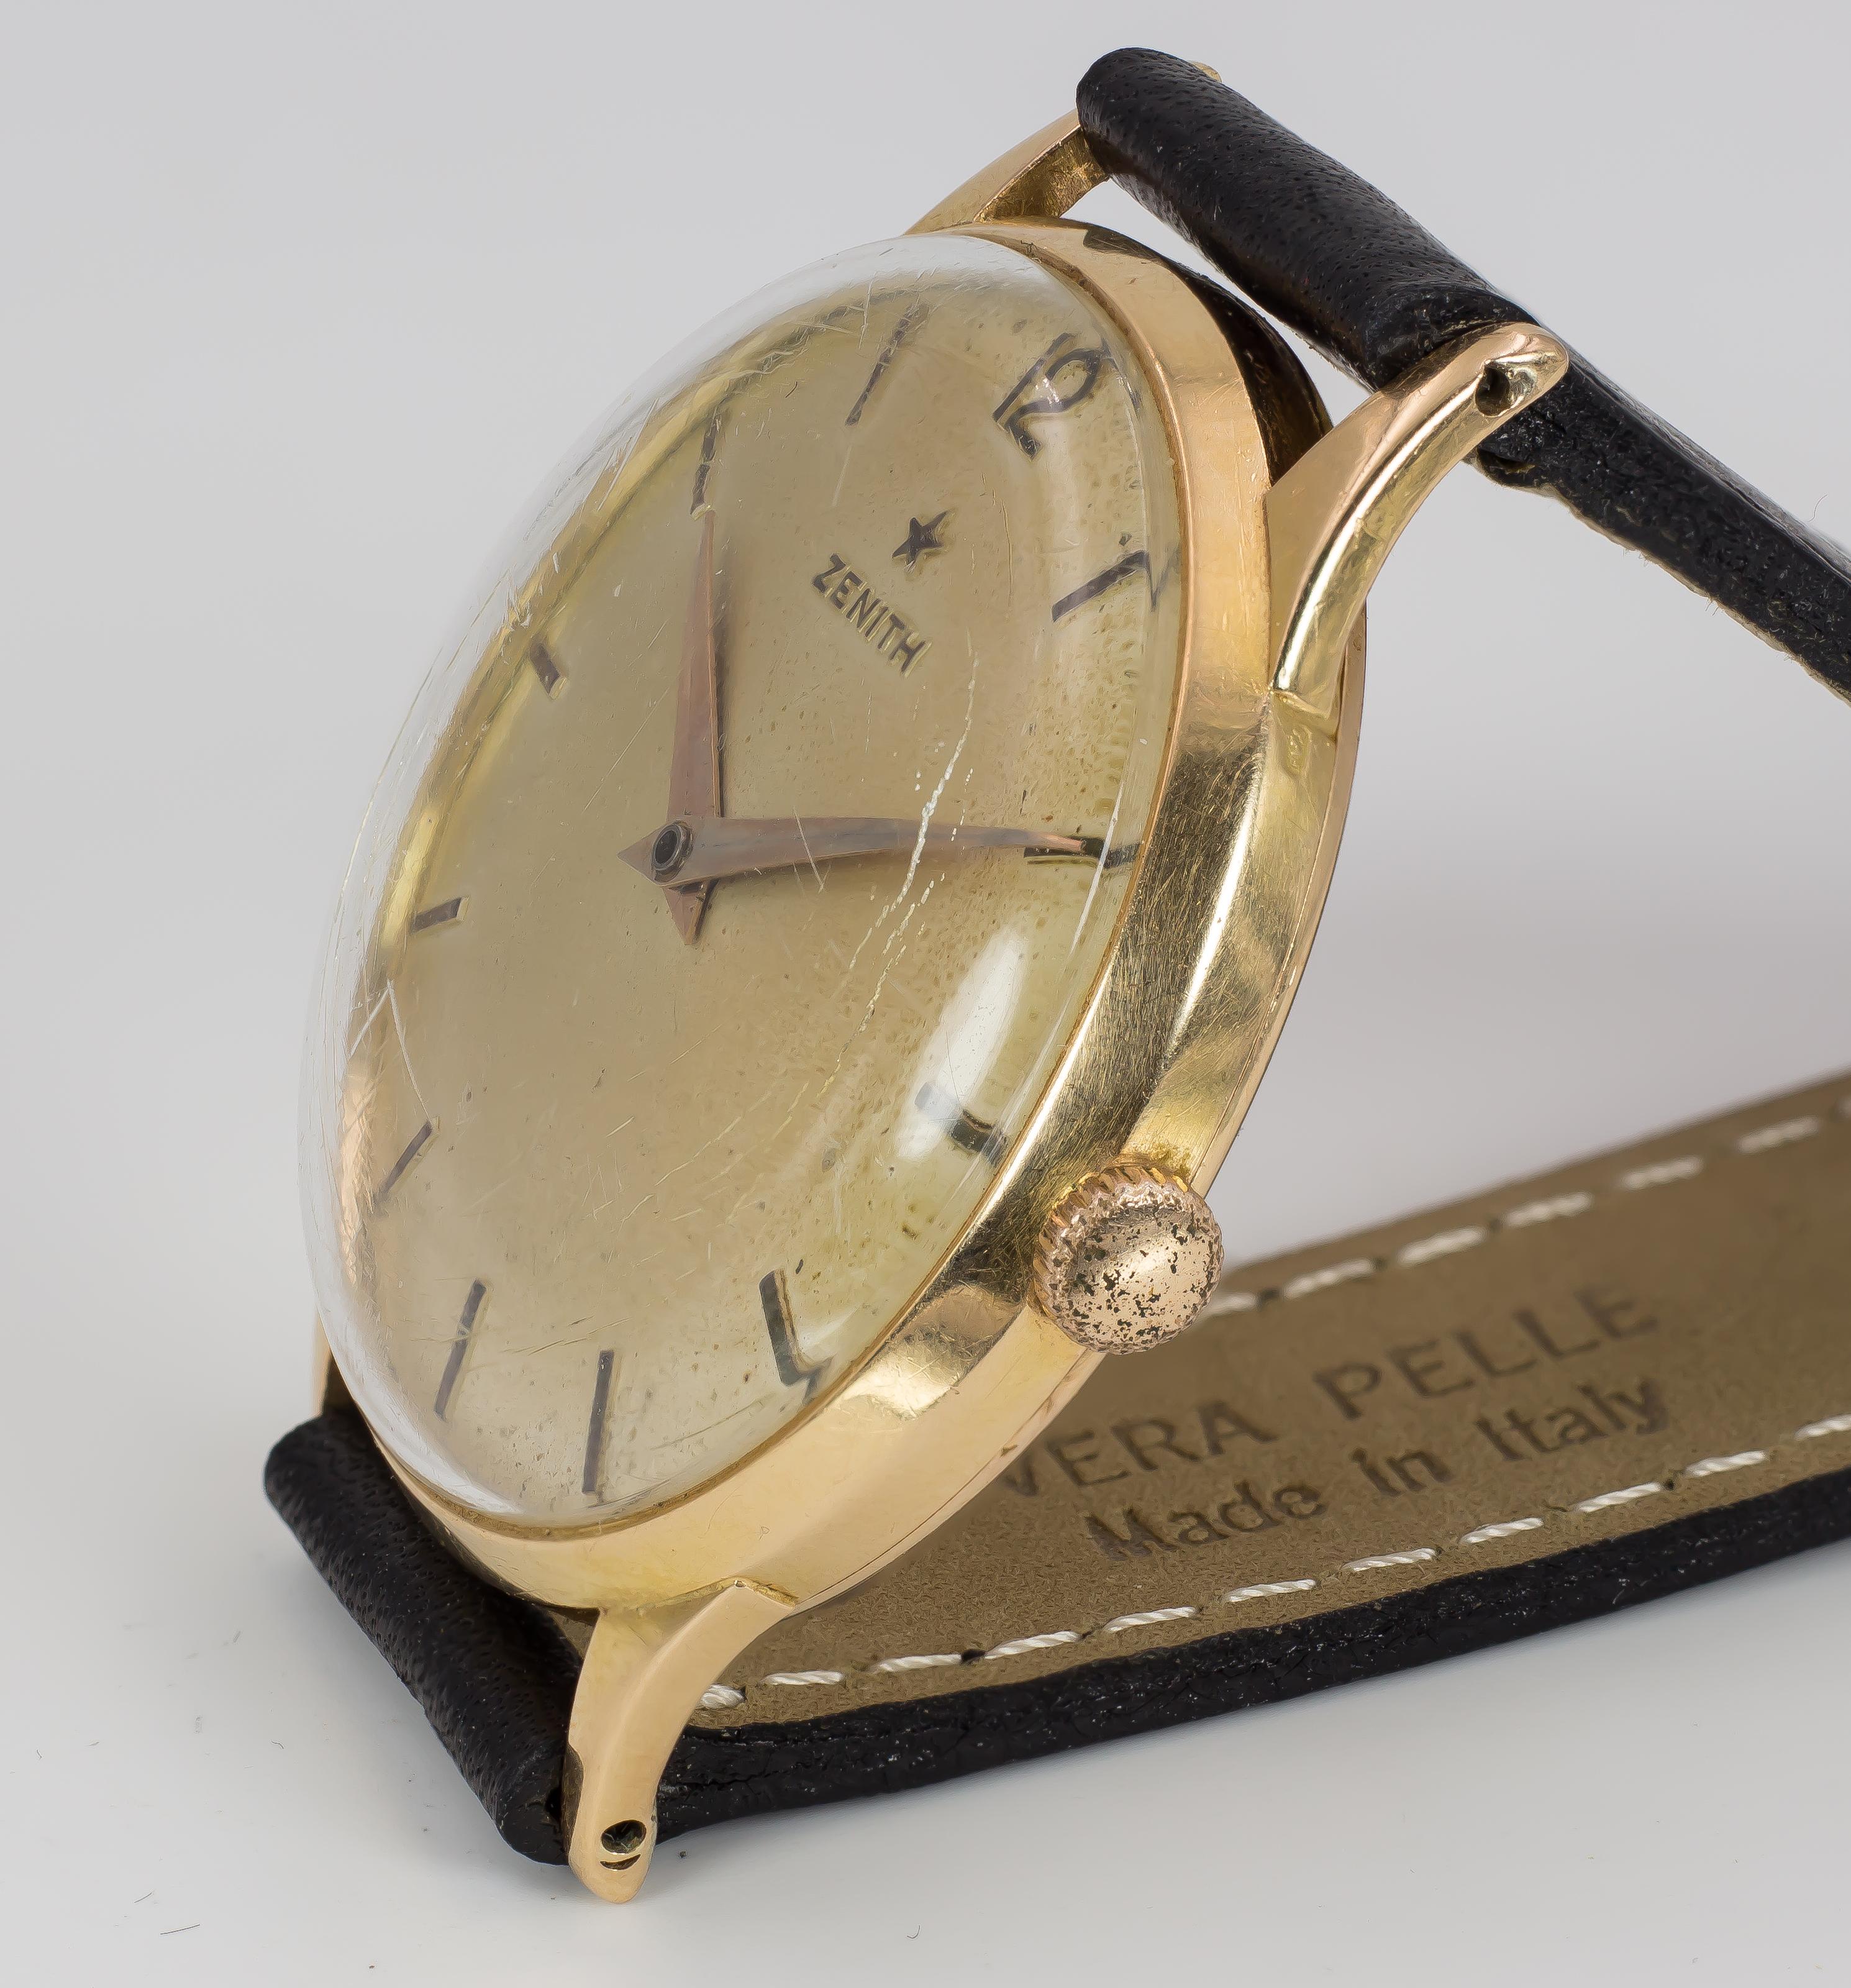 A vintage 18K gold Zenith wrist watch, dating from the 1950s.
The watch is well working.

BRAND
Zenith

MATERIALS
18K gold

MEASUREMENTS
Diameter: 36 mm